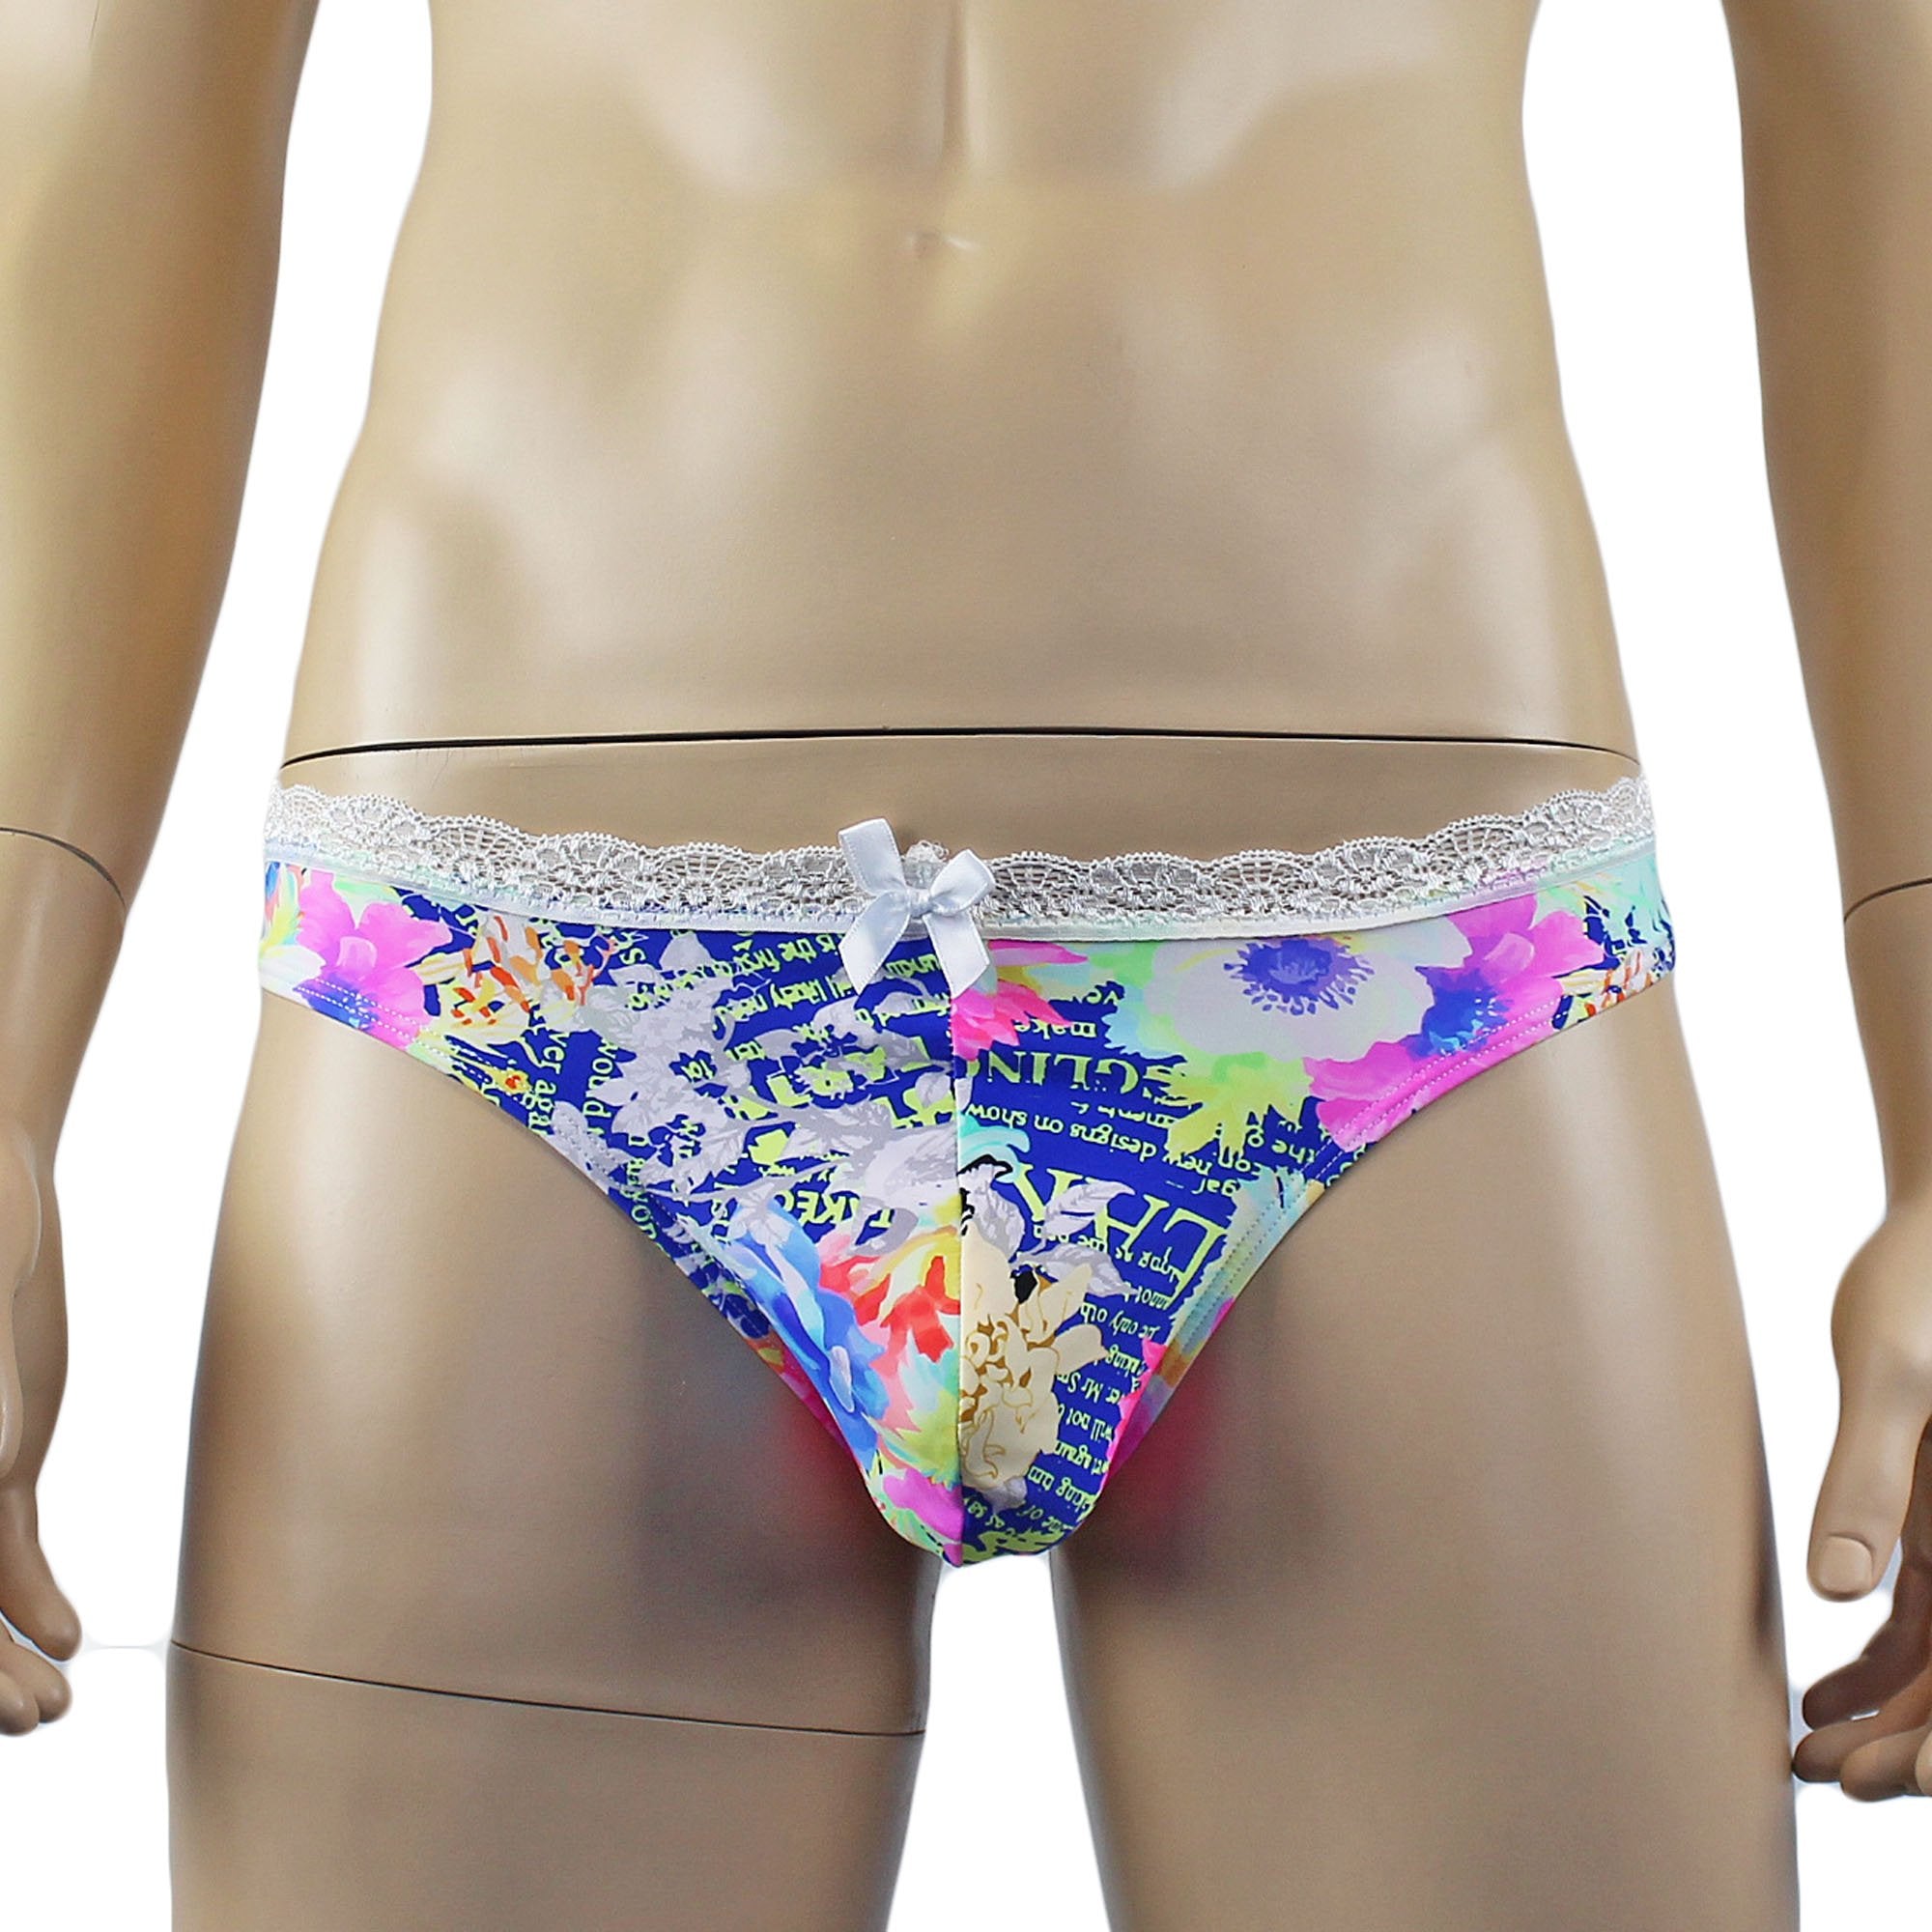 Mens Suzanne Floral G string Thong with Lace Trim